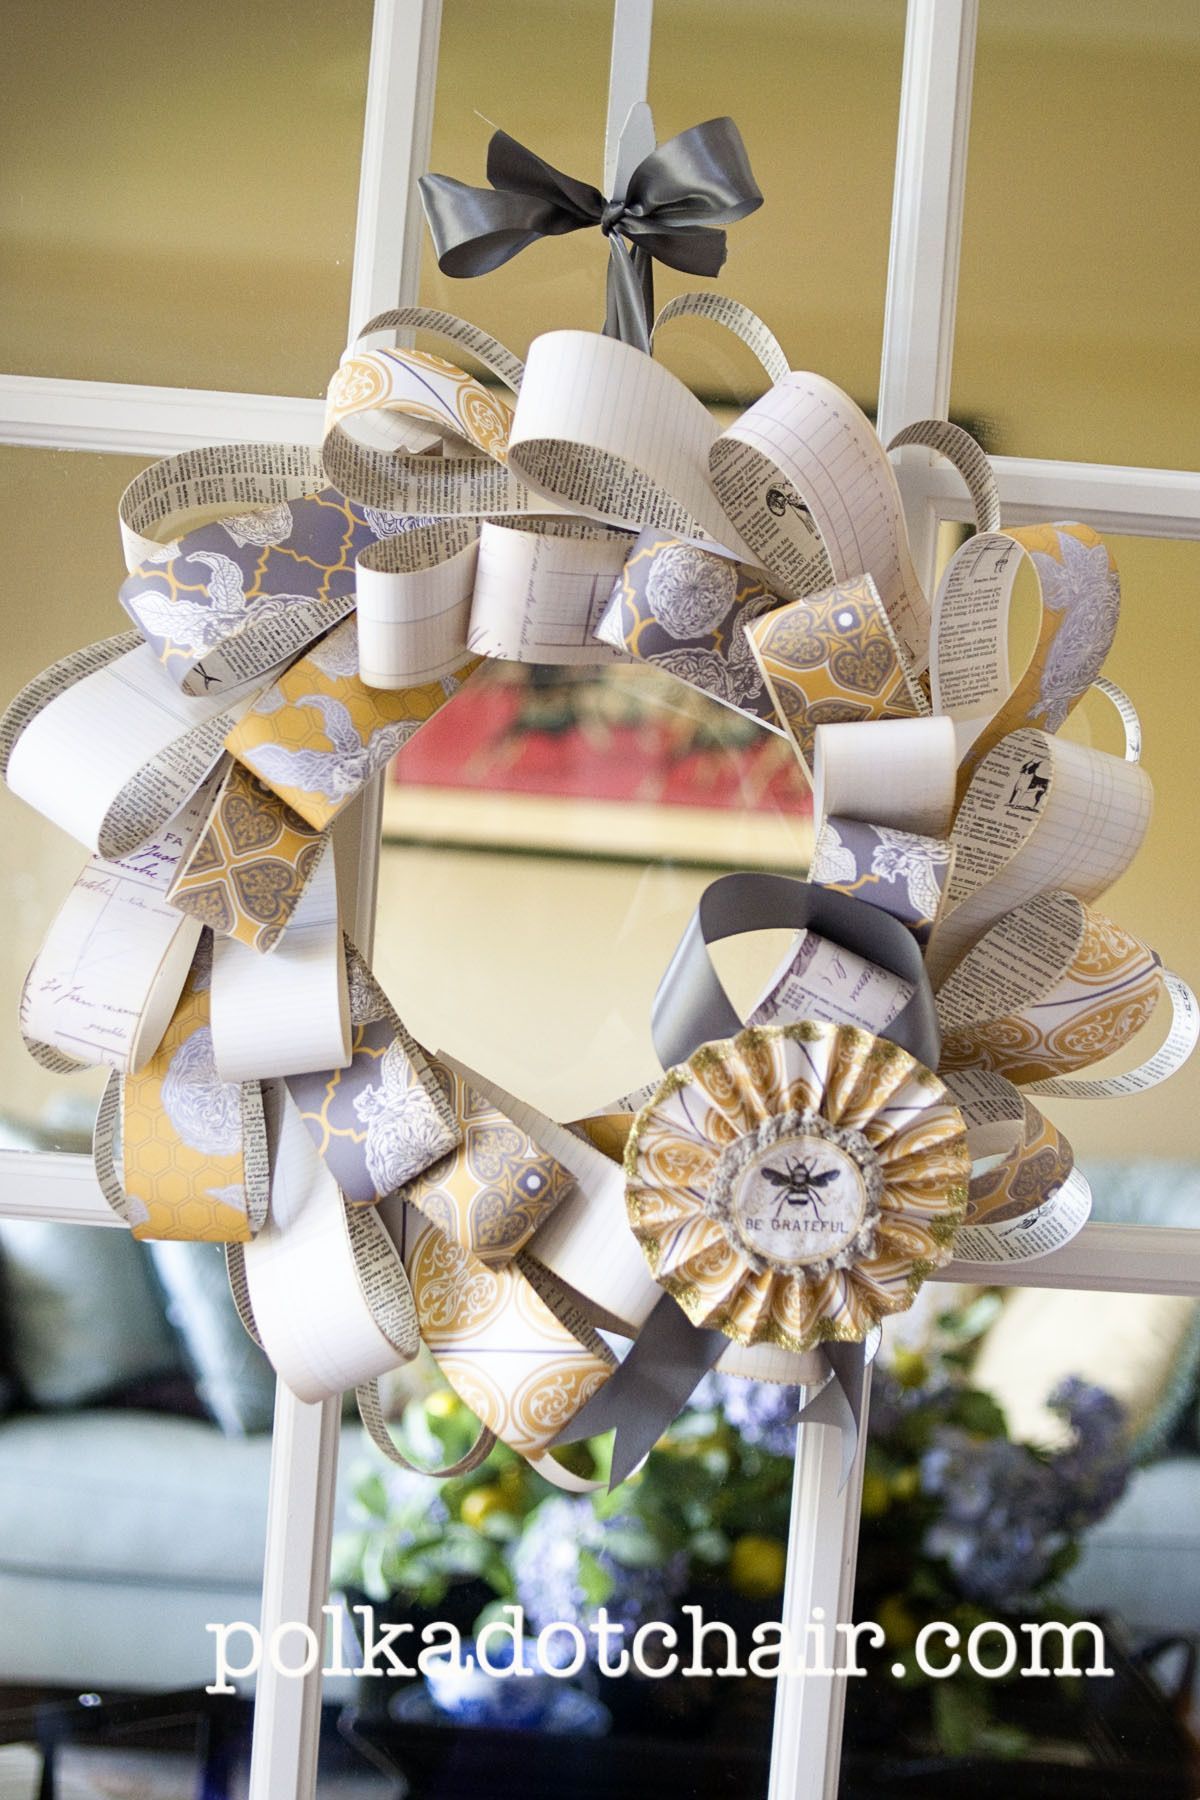 Love this paper wreath!!!